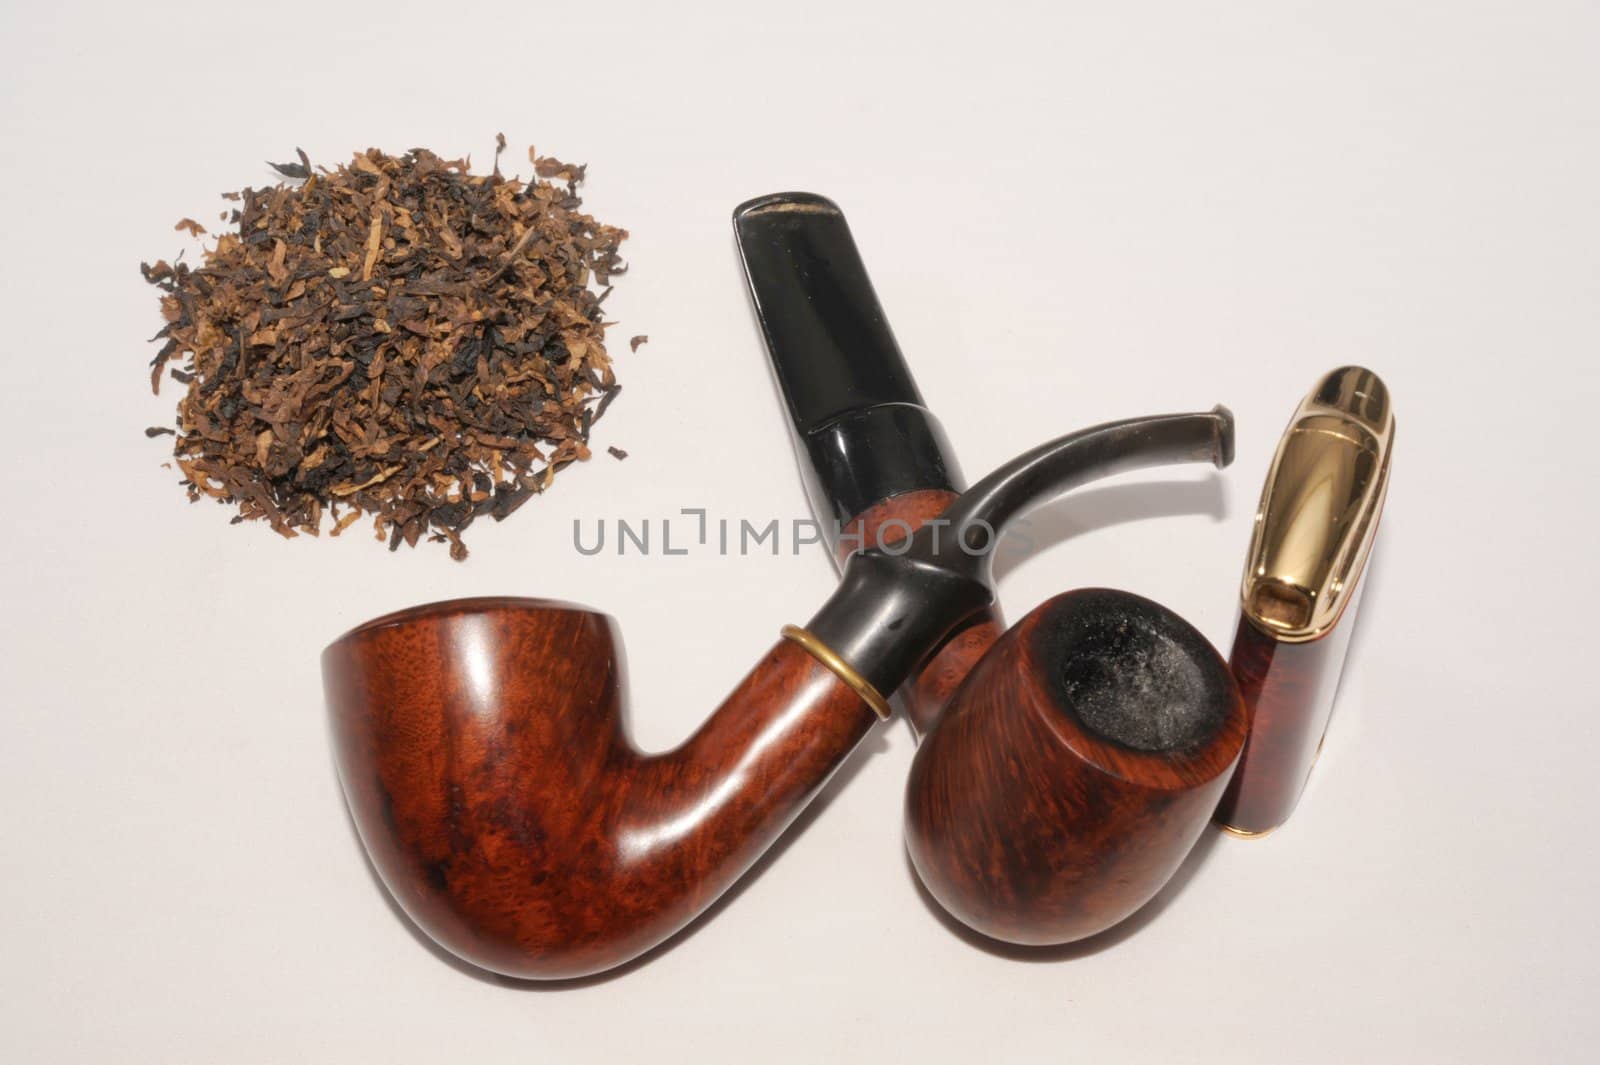 Tobacco,  Lighter And Two Smoking Pipes On White Background. 